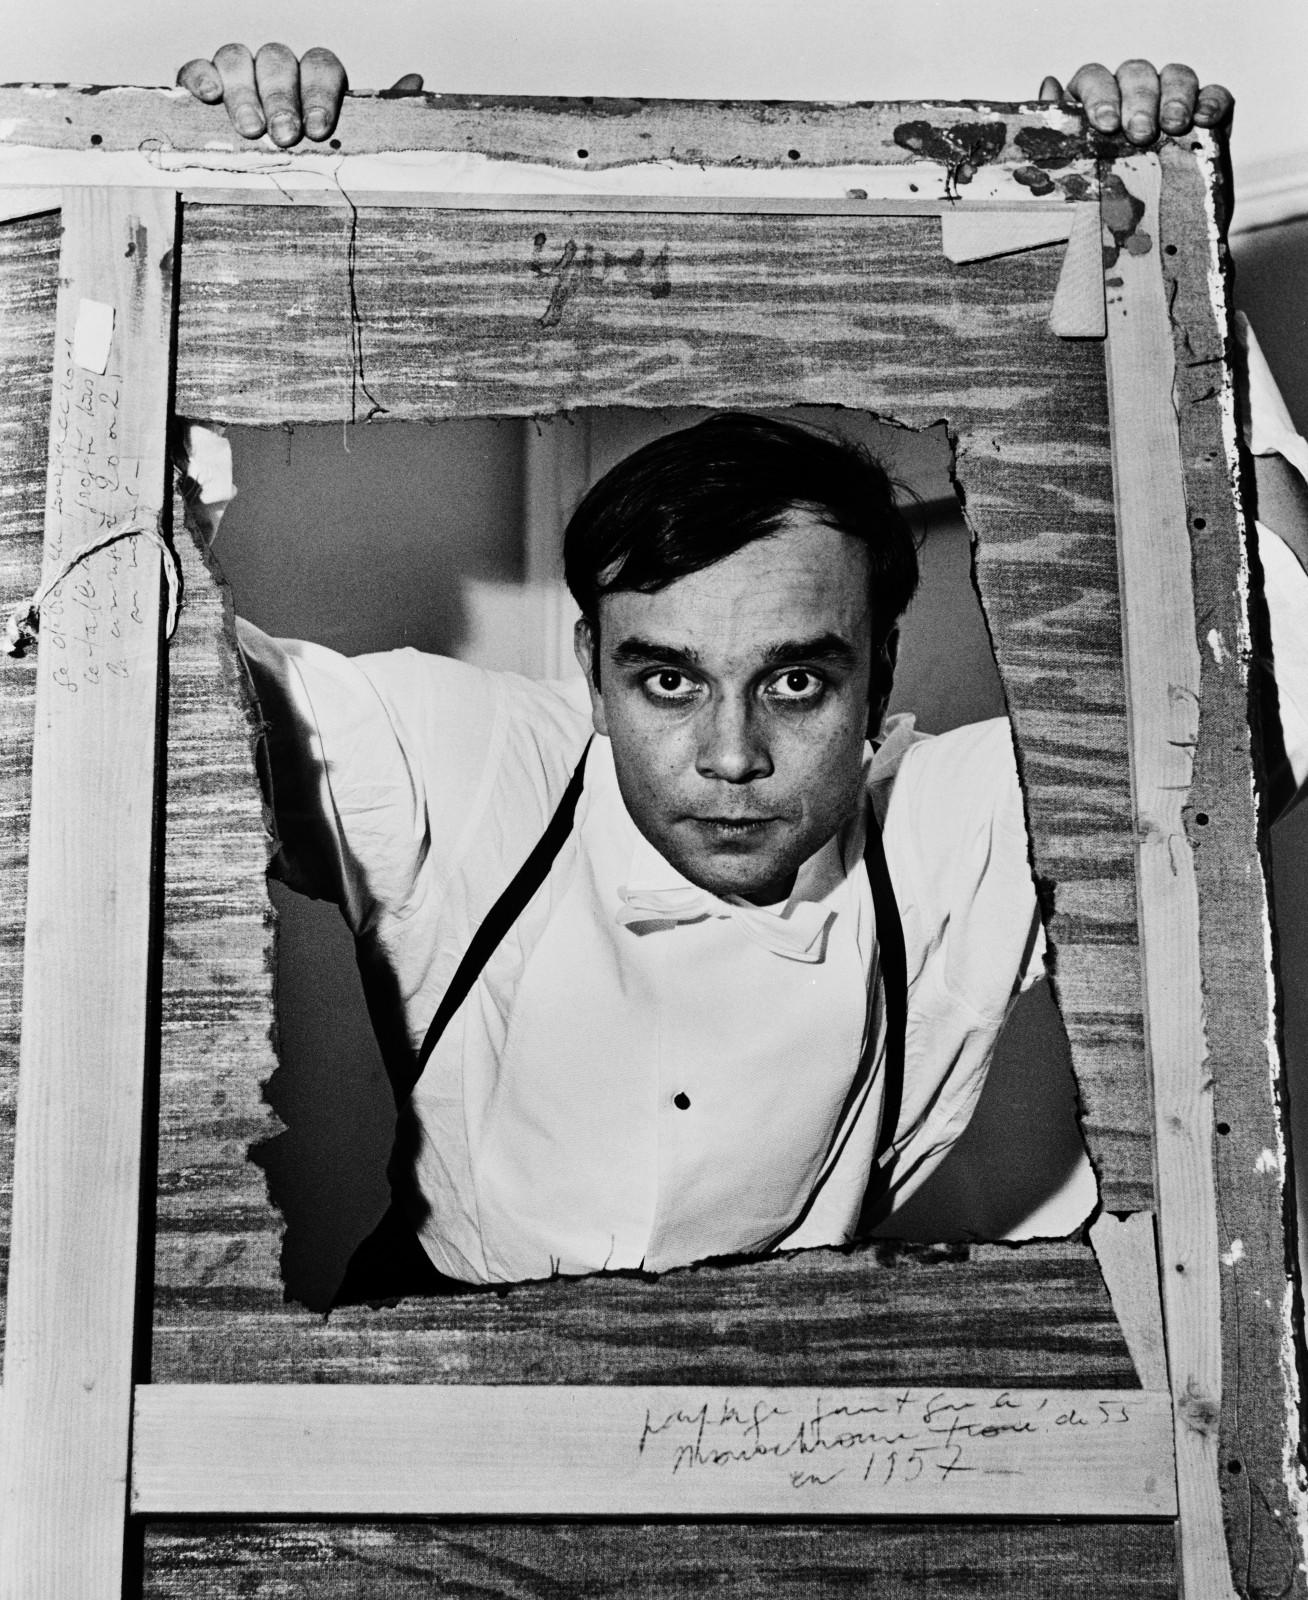 Portrait of Yves Klein with the holey Monochrome